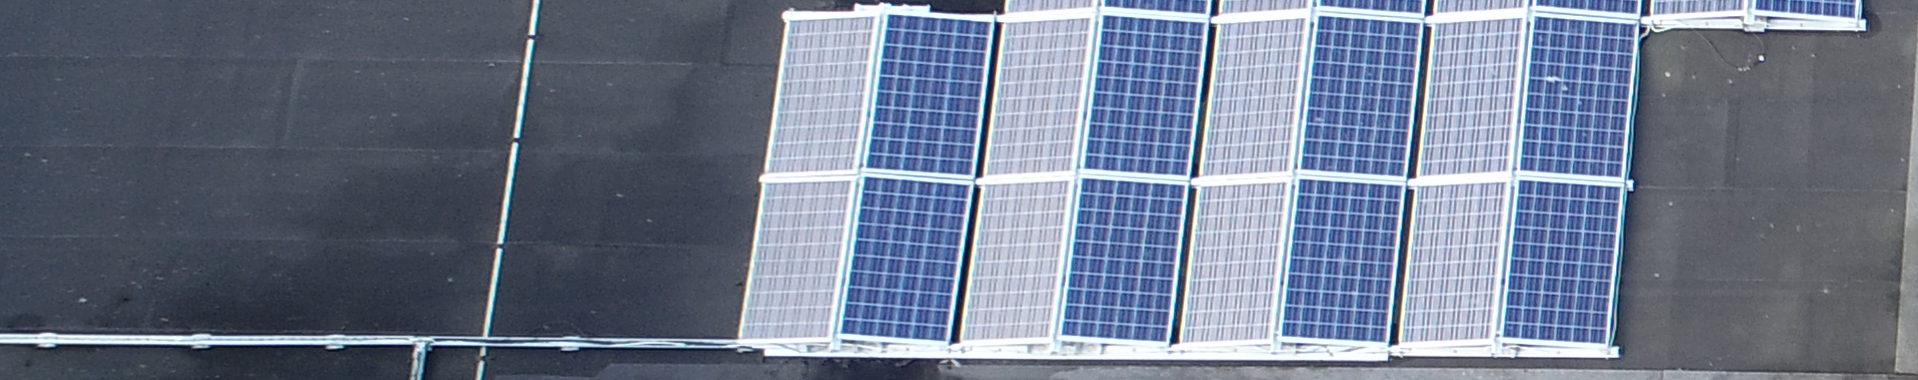 Solar Panels on a roof 